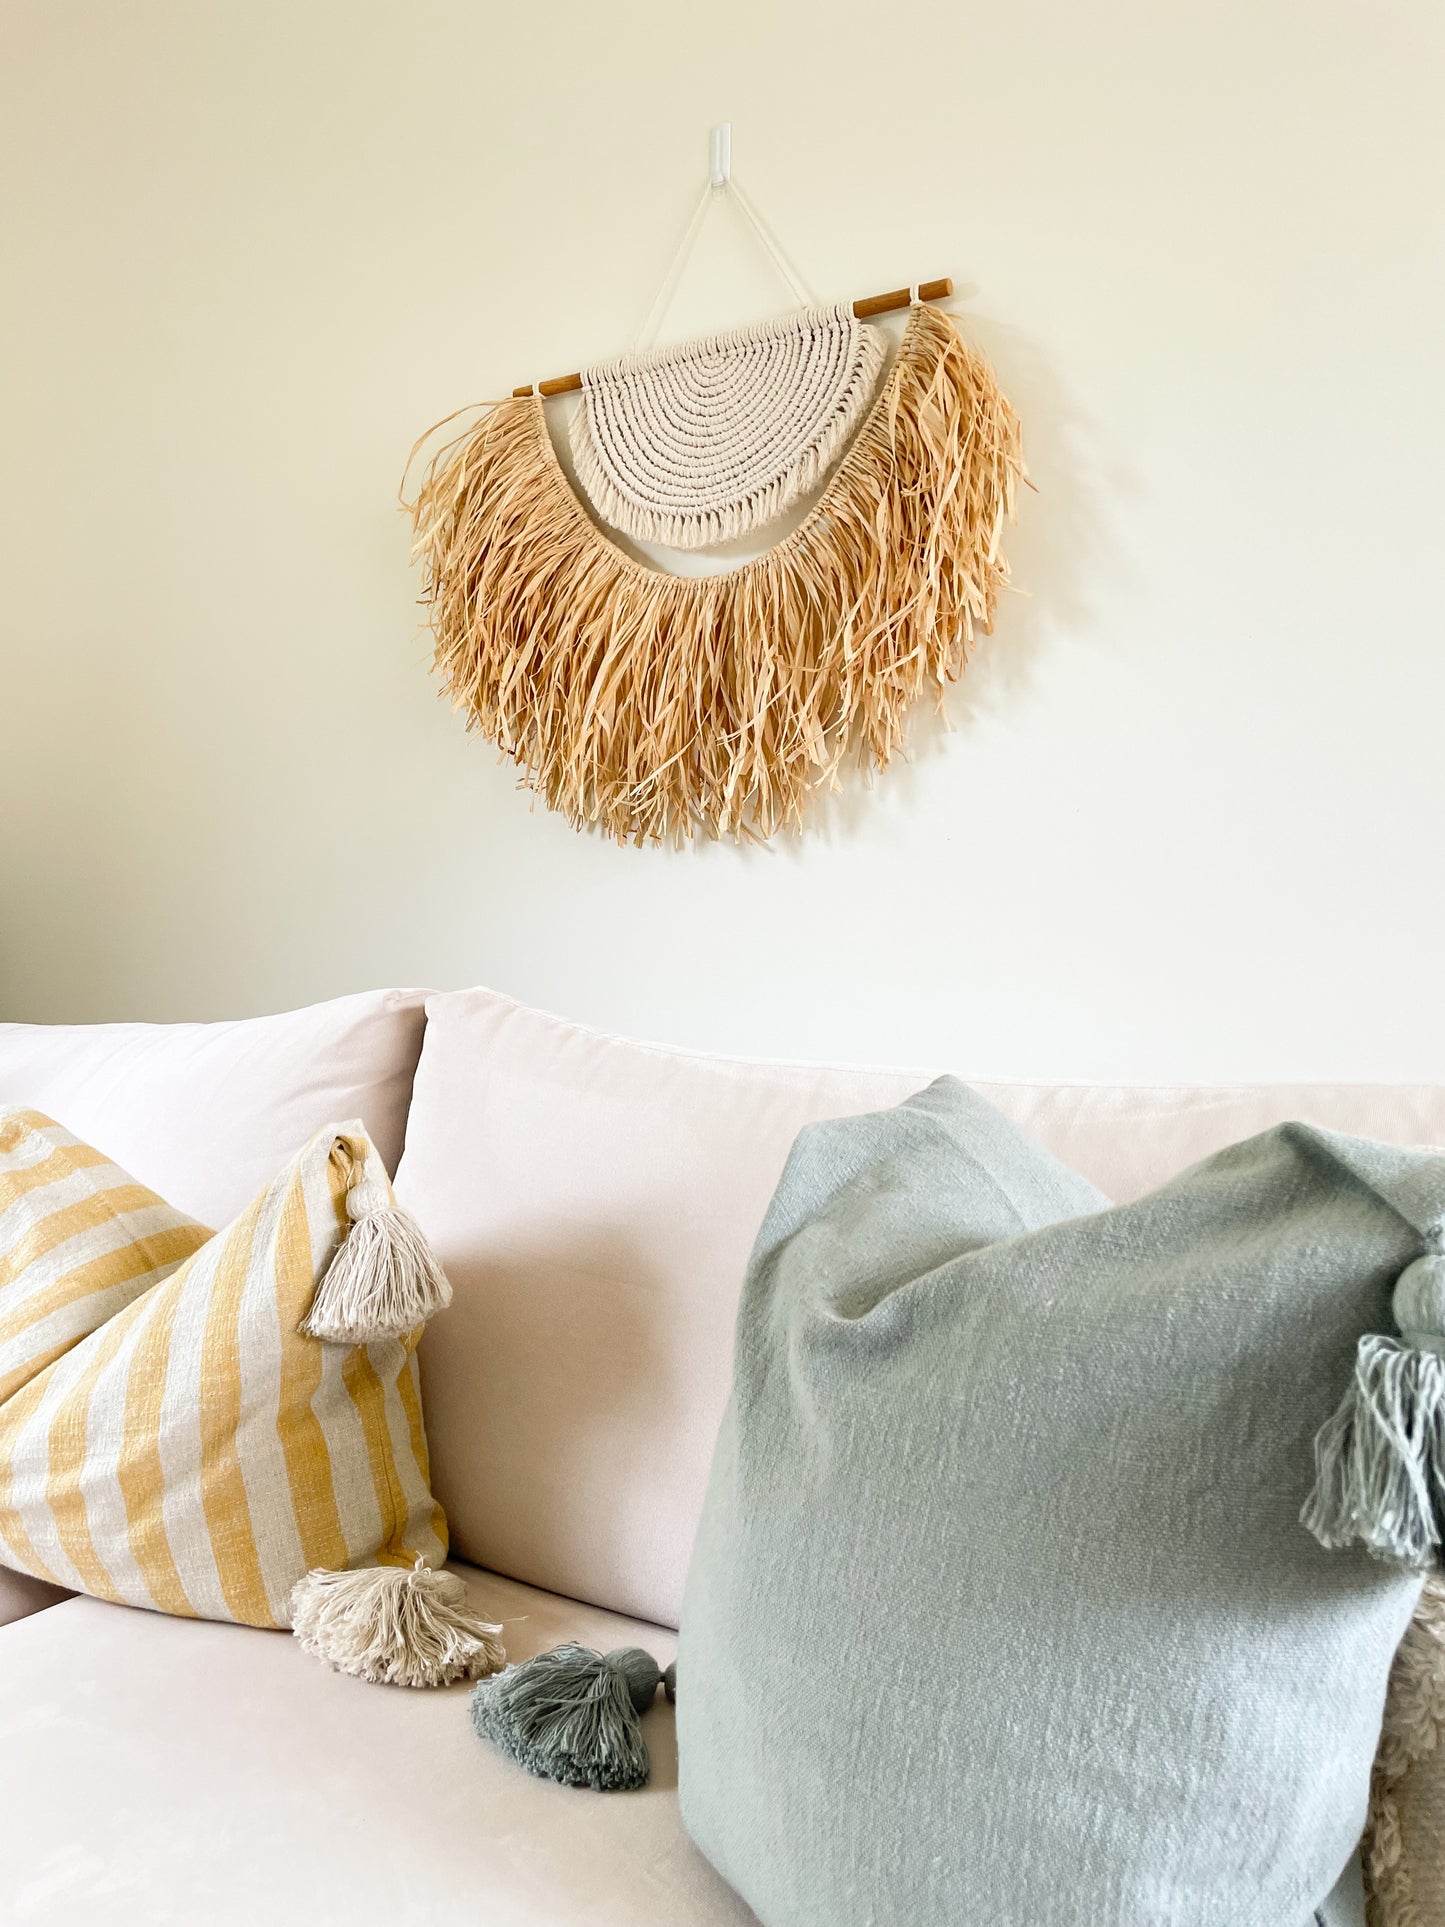 Large macrame and raffia wall hanging hanged on a wall above a large sofa styled with coastal style cushions